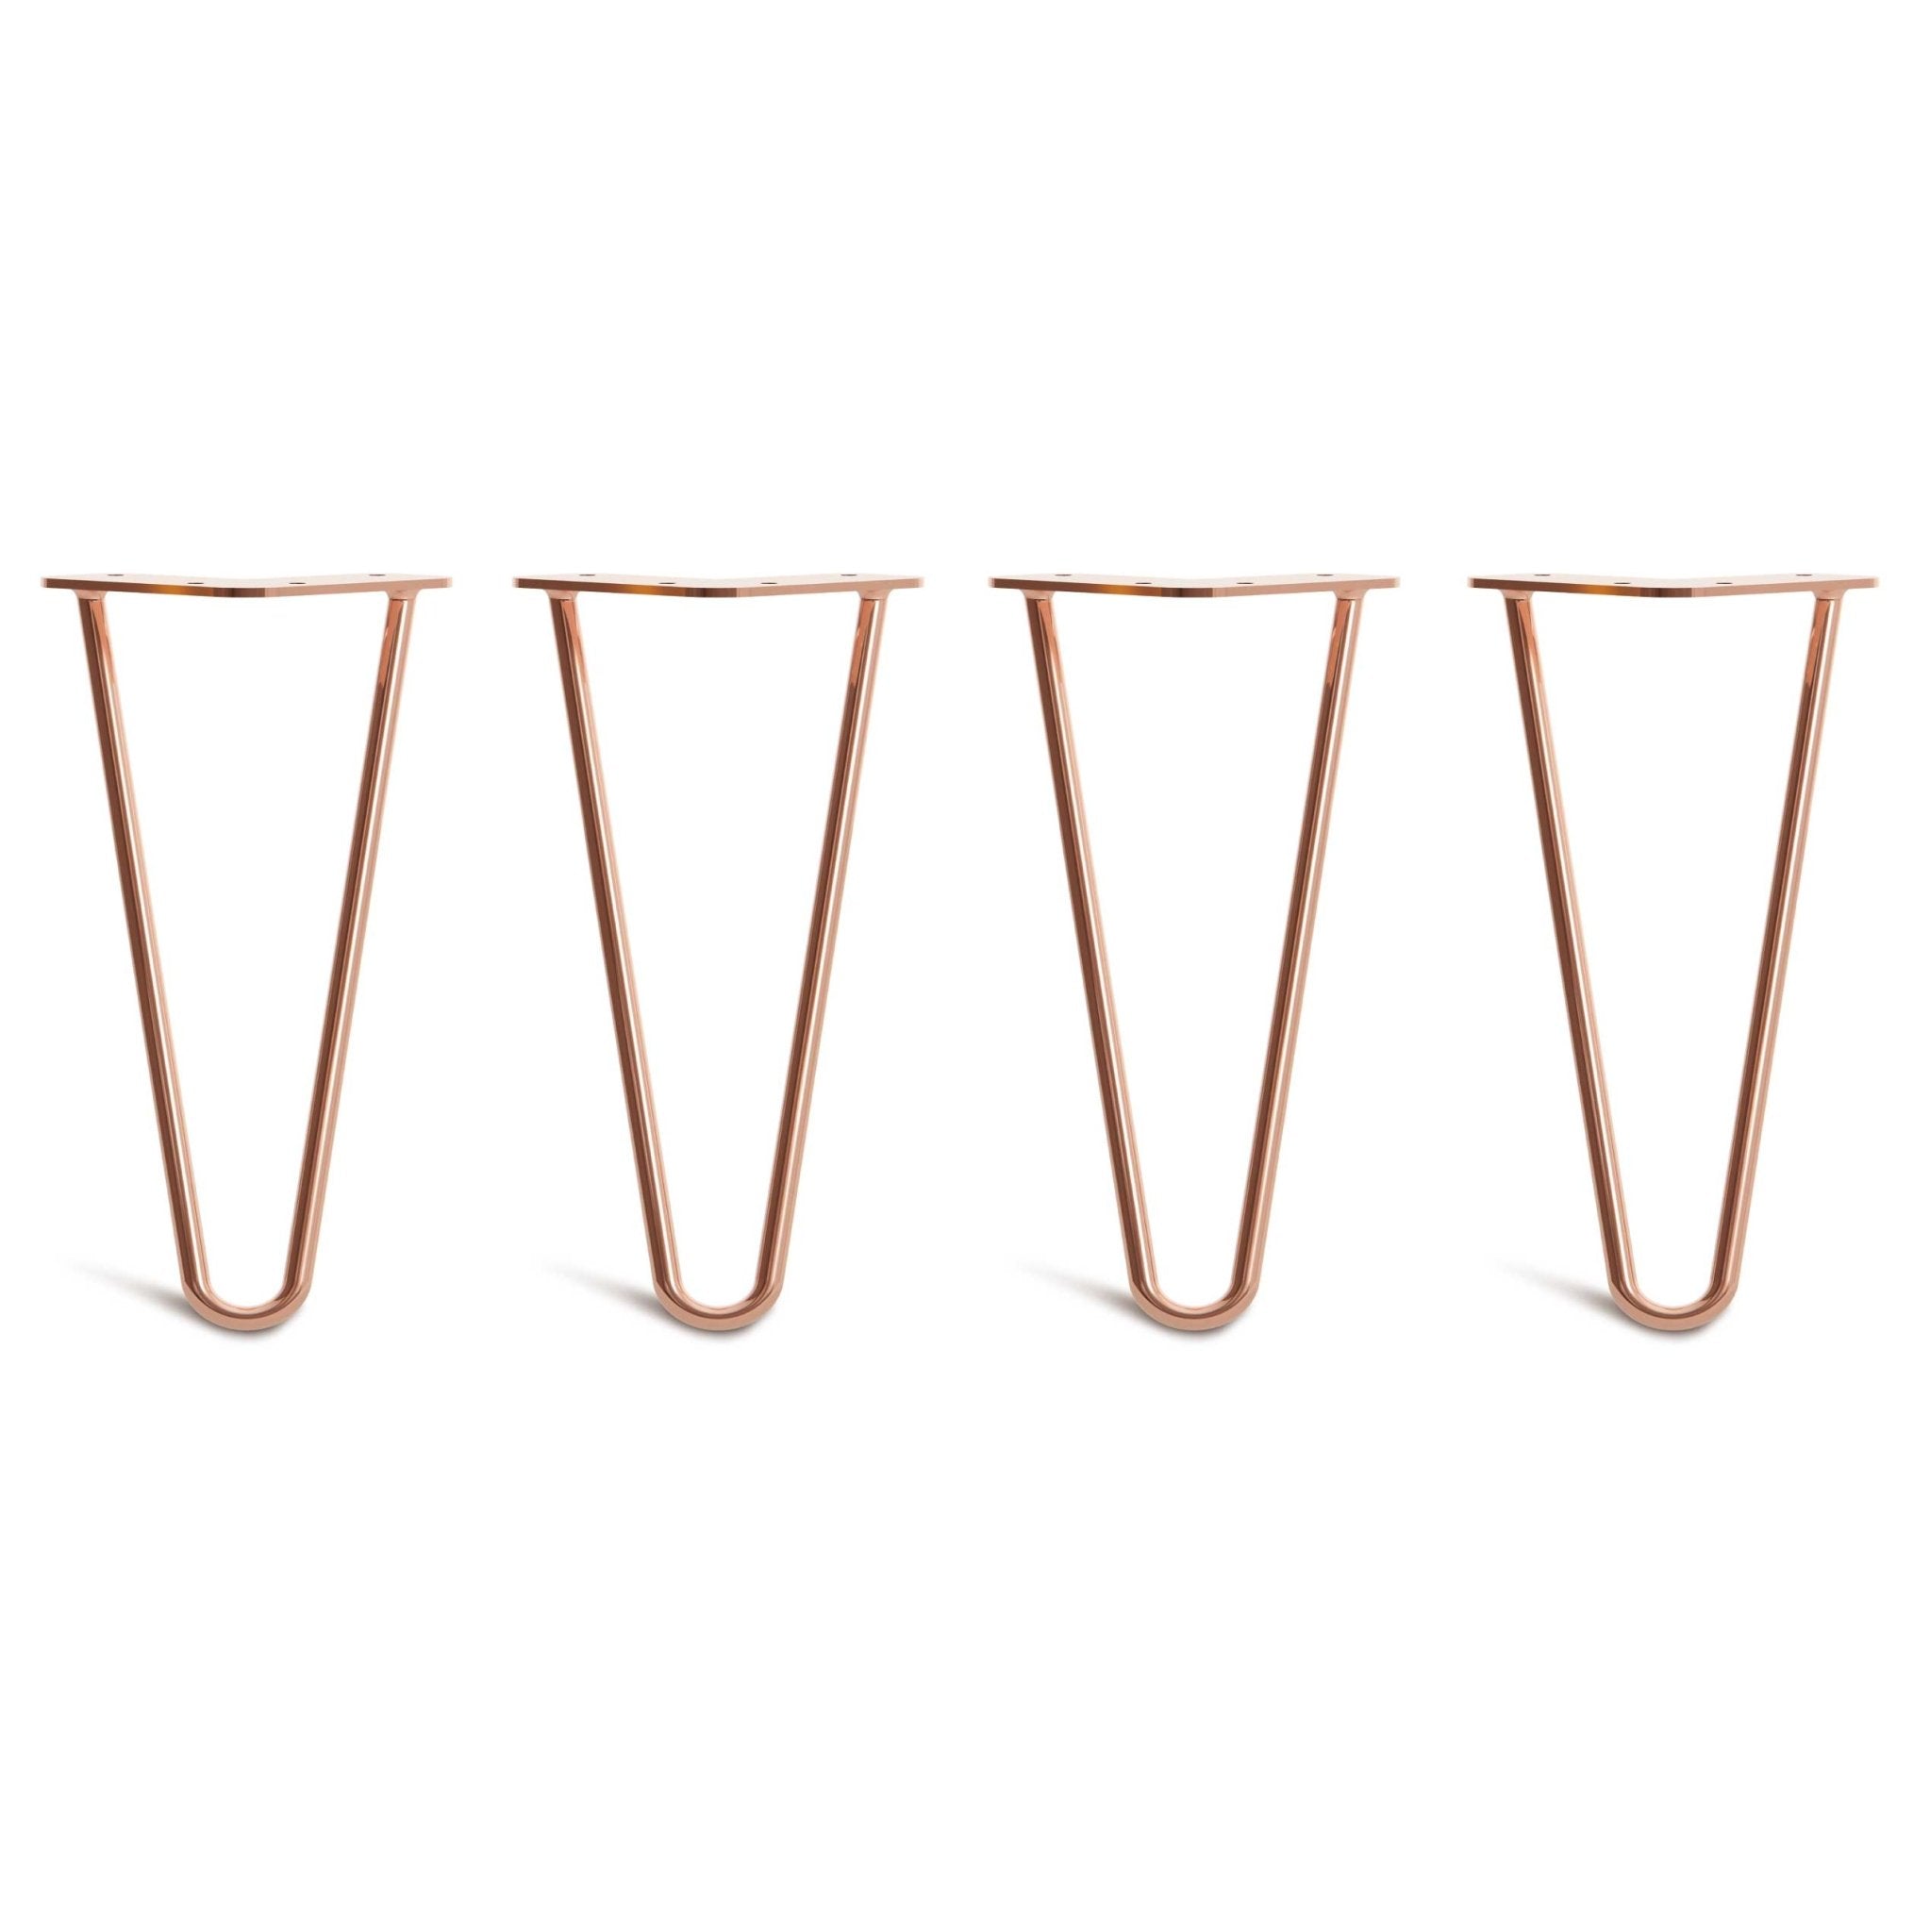 25cm Hairpin Legs - Low Coffee Table-2 Rod-Copper-The Hairpin Leg Co.